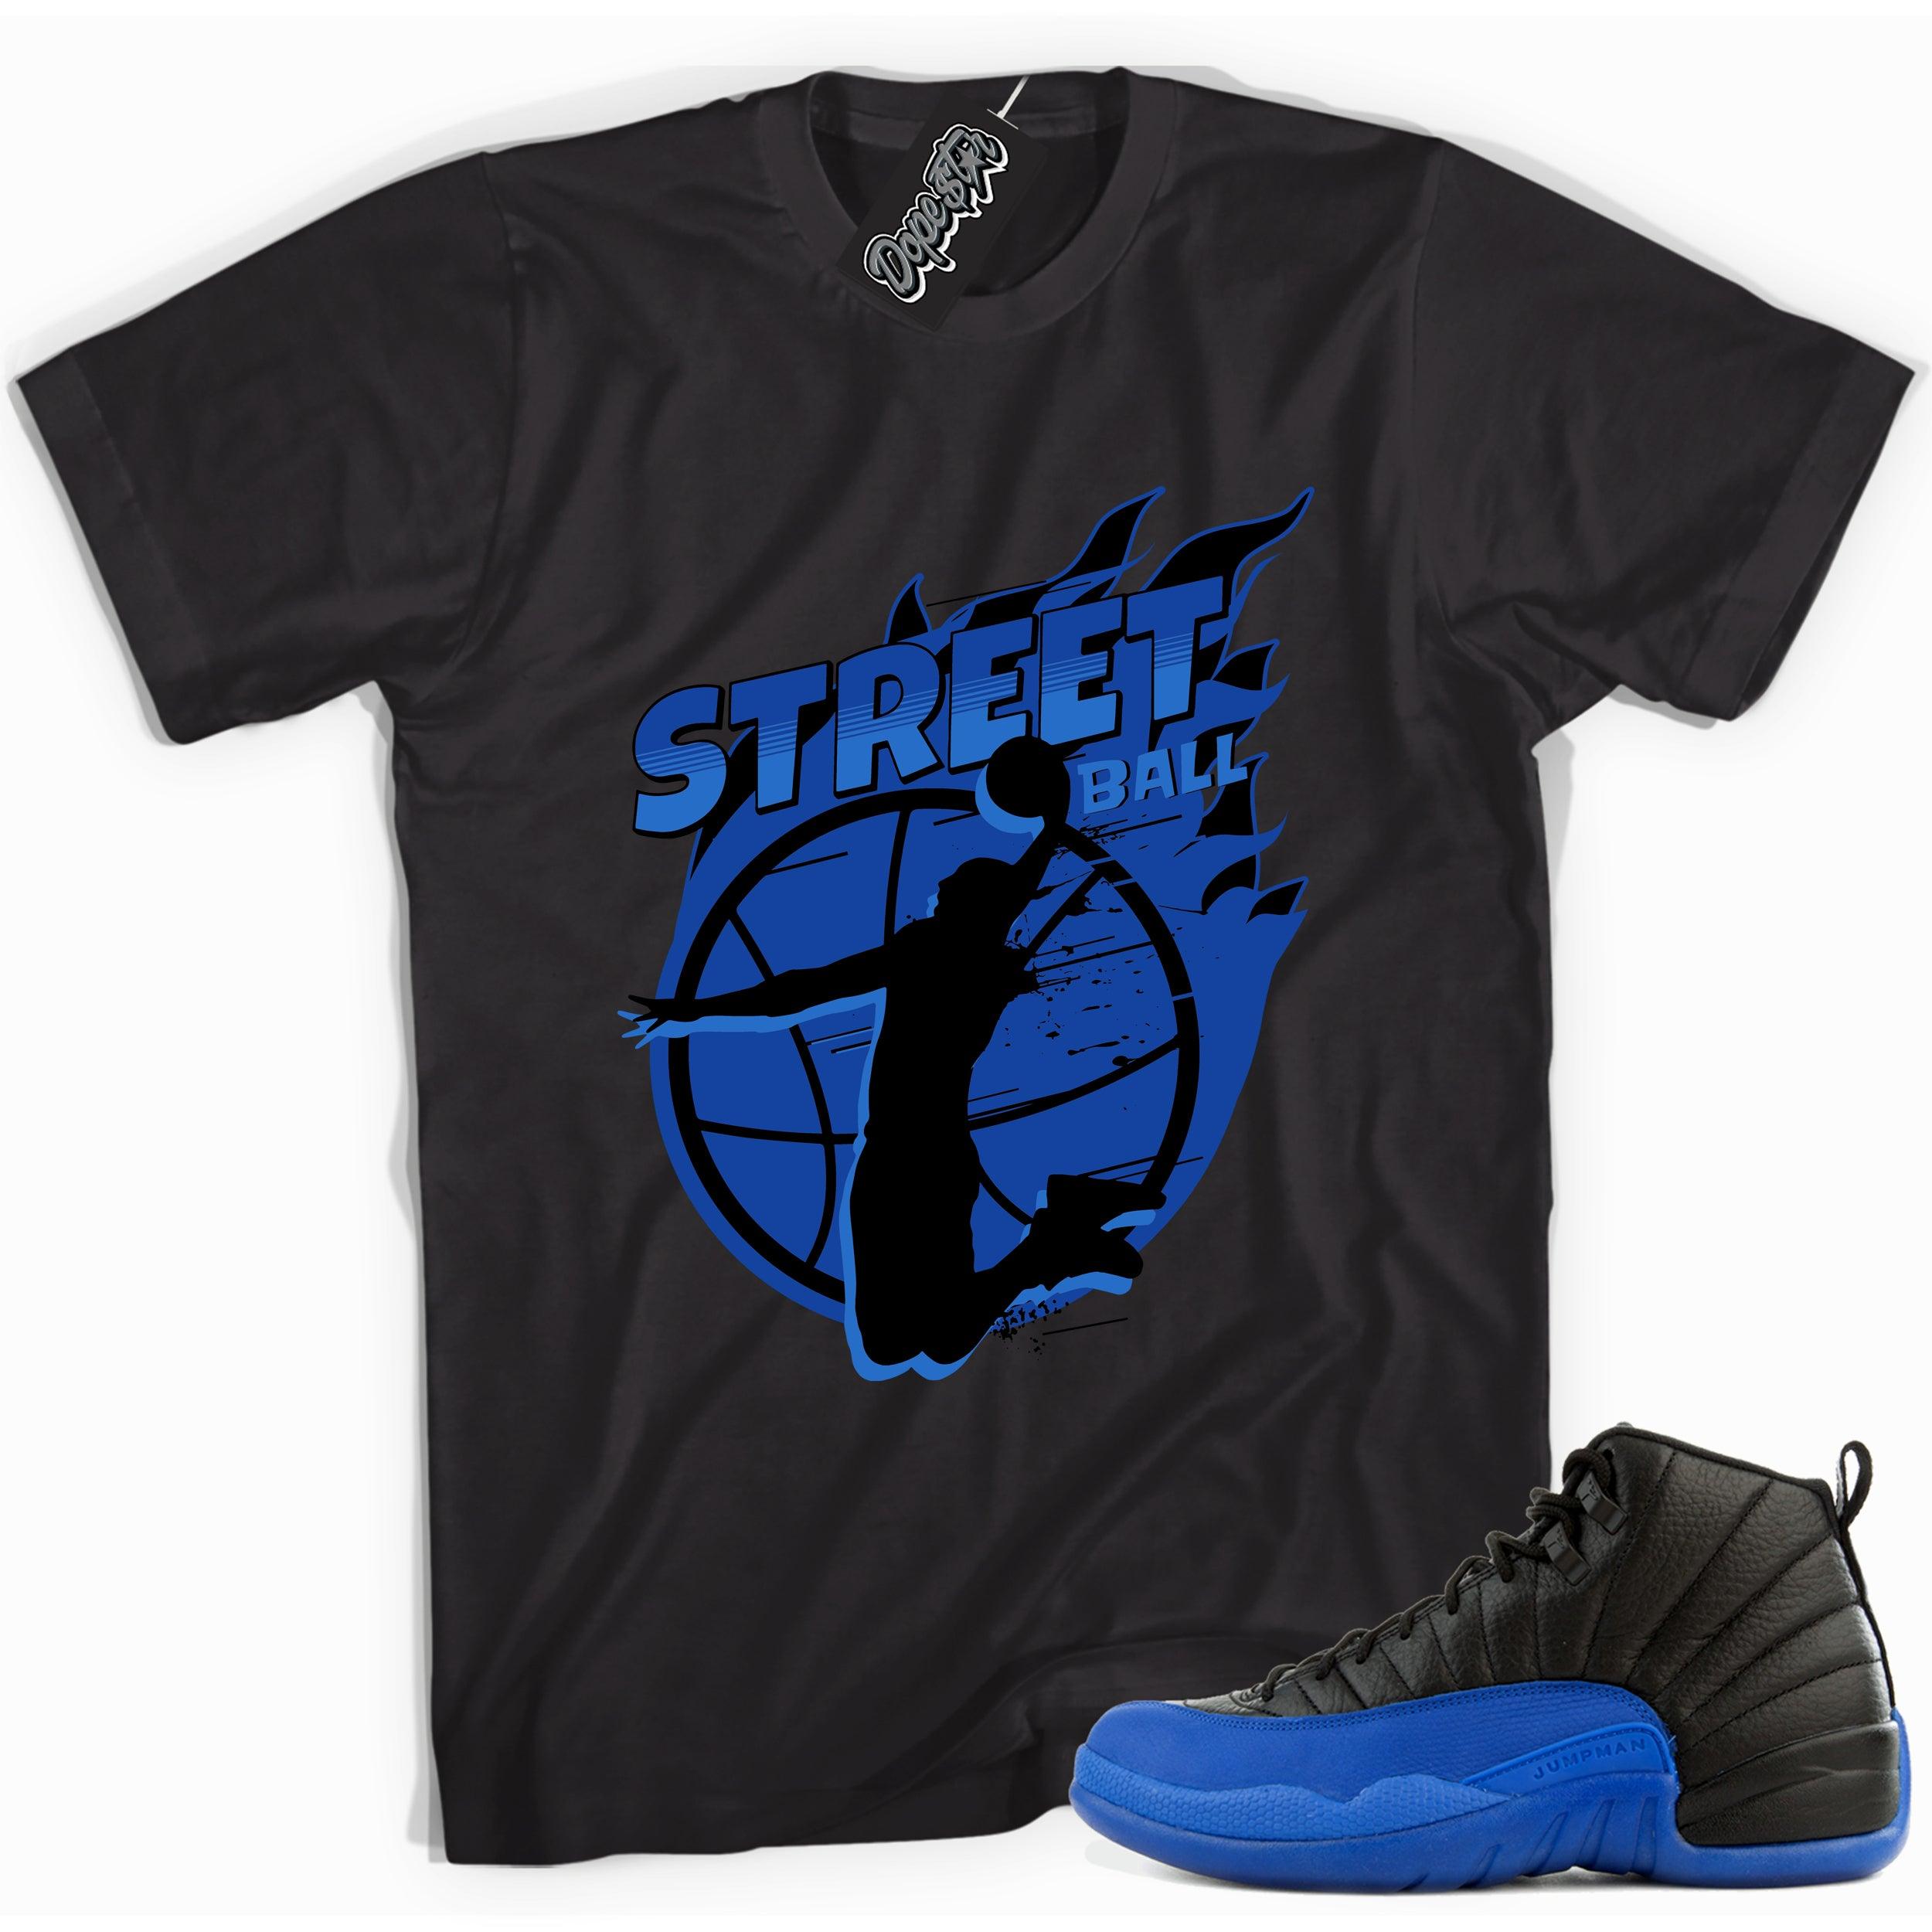 Cool black graphic tee with 'street ball' print, that perfectly matches  Air Jordan 12 Retro Black Game Royal sneakers.